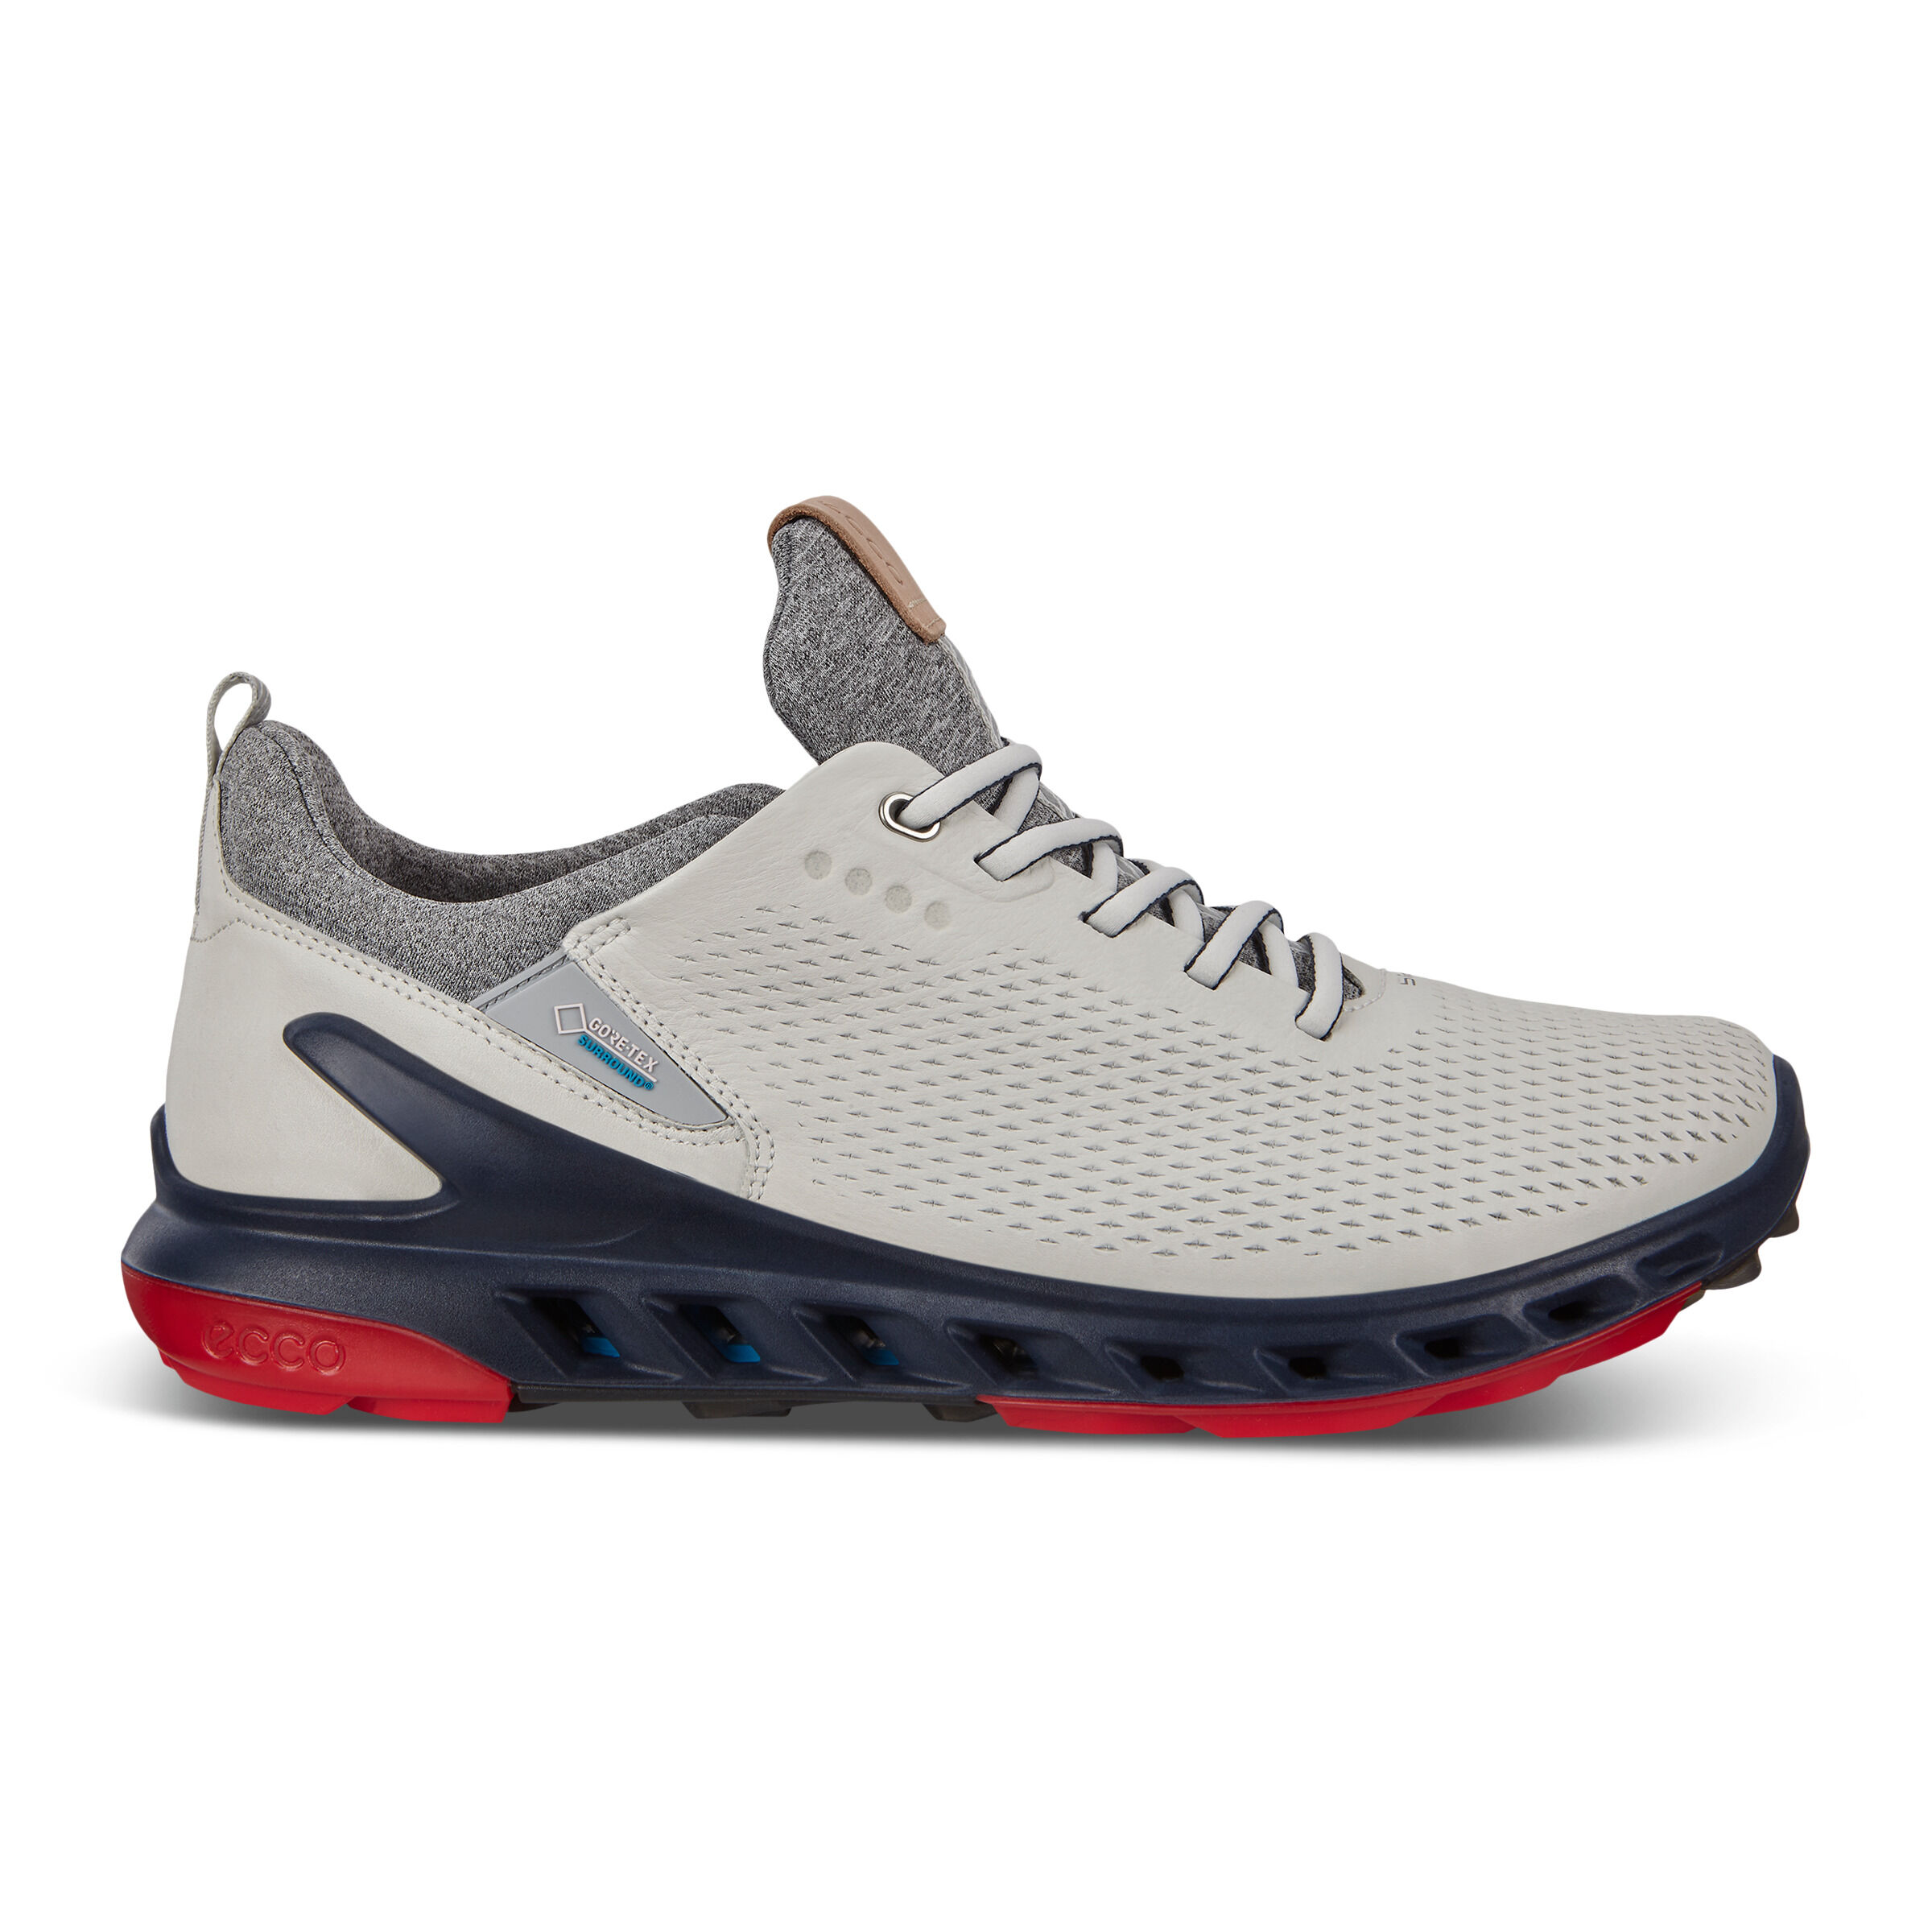 Discover men's golf shoes on sale 